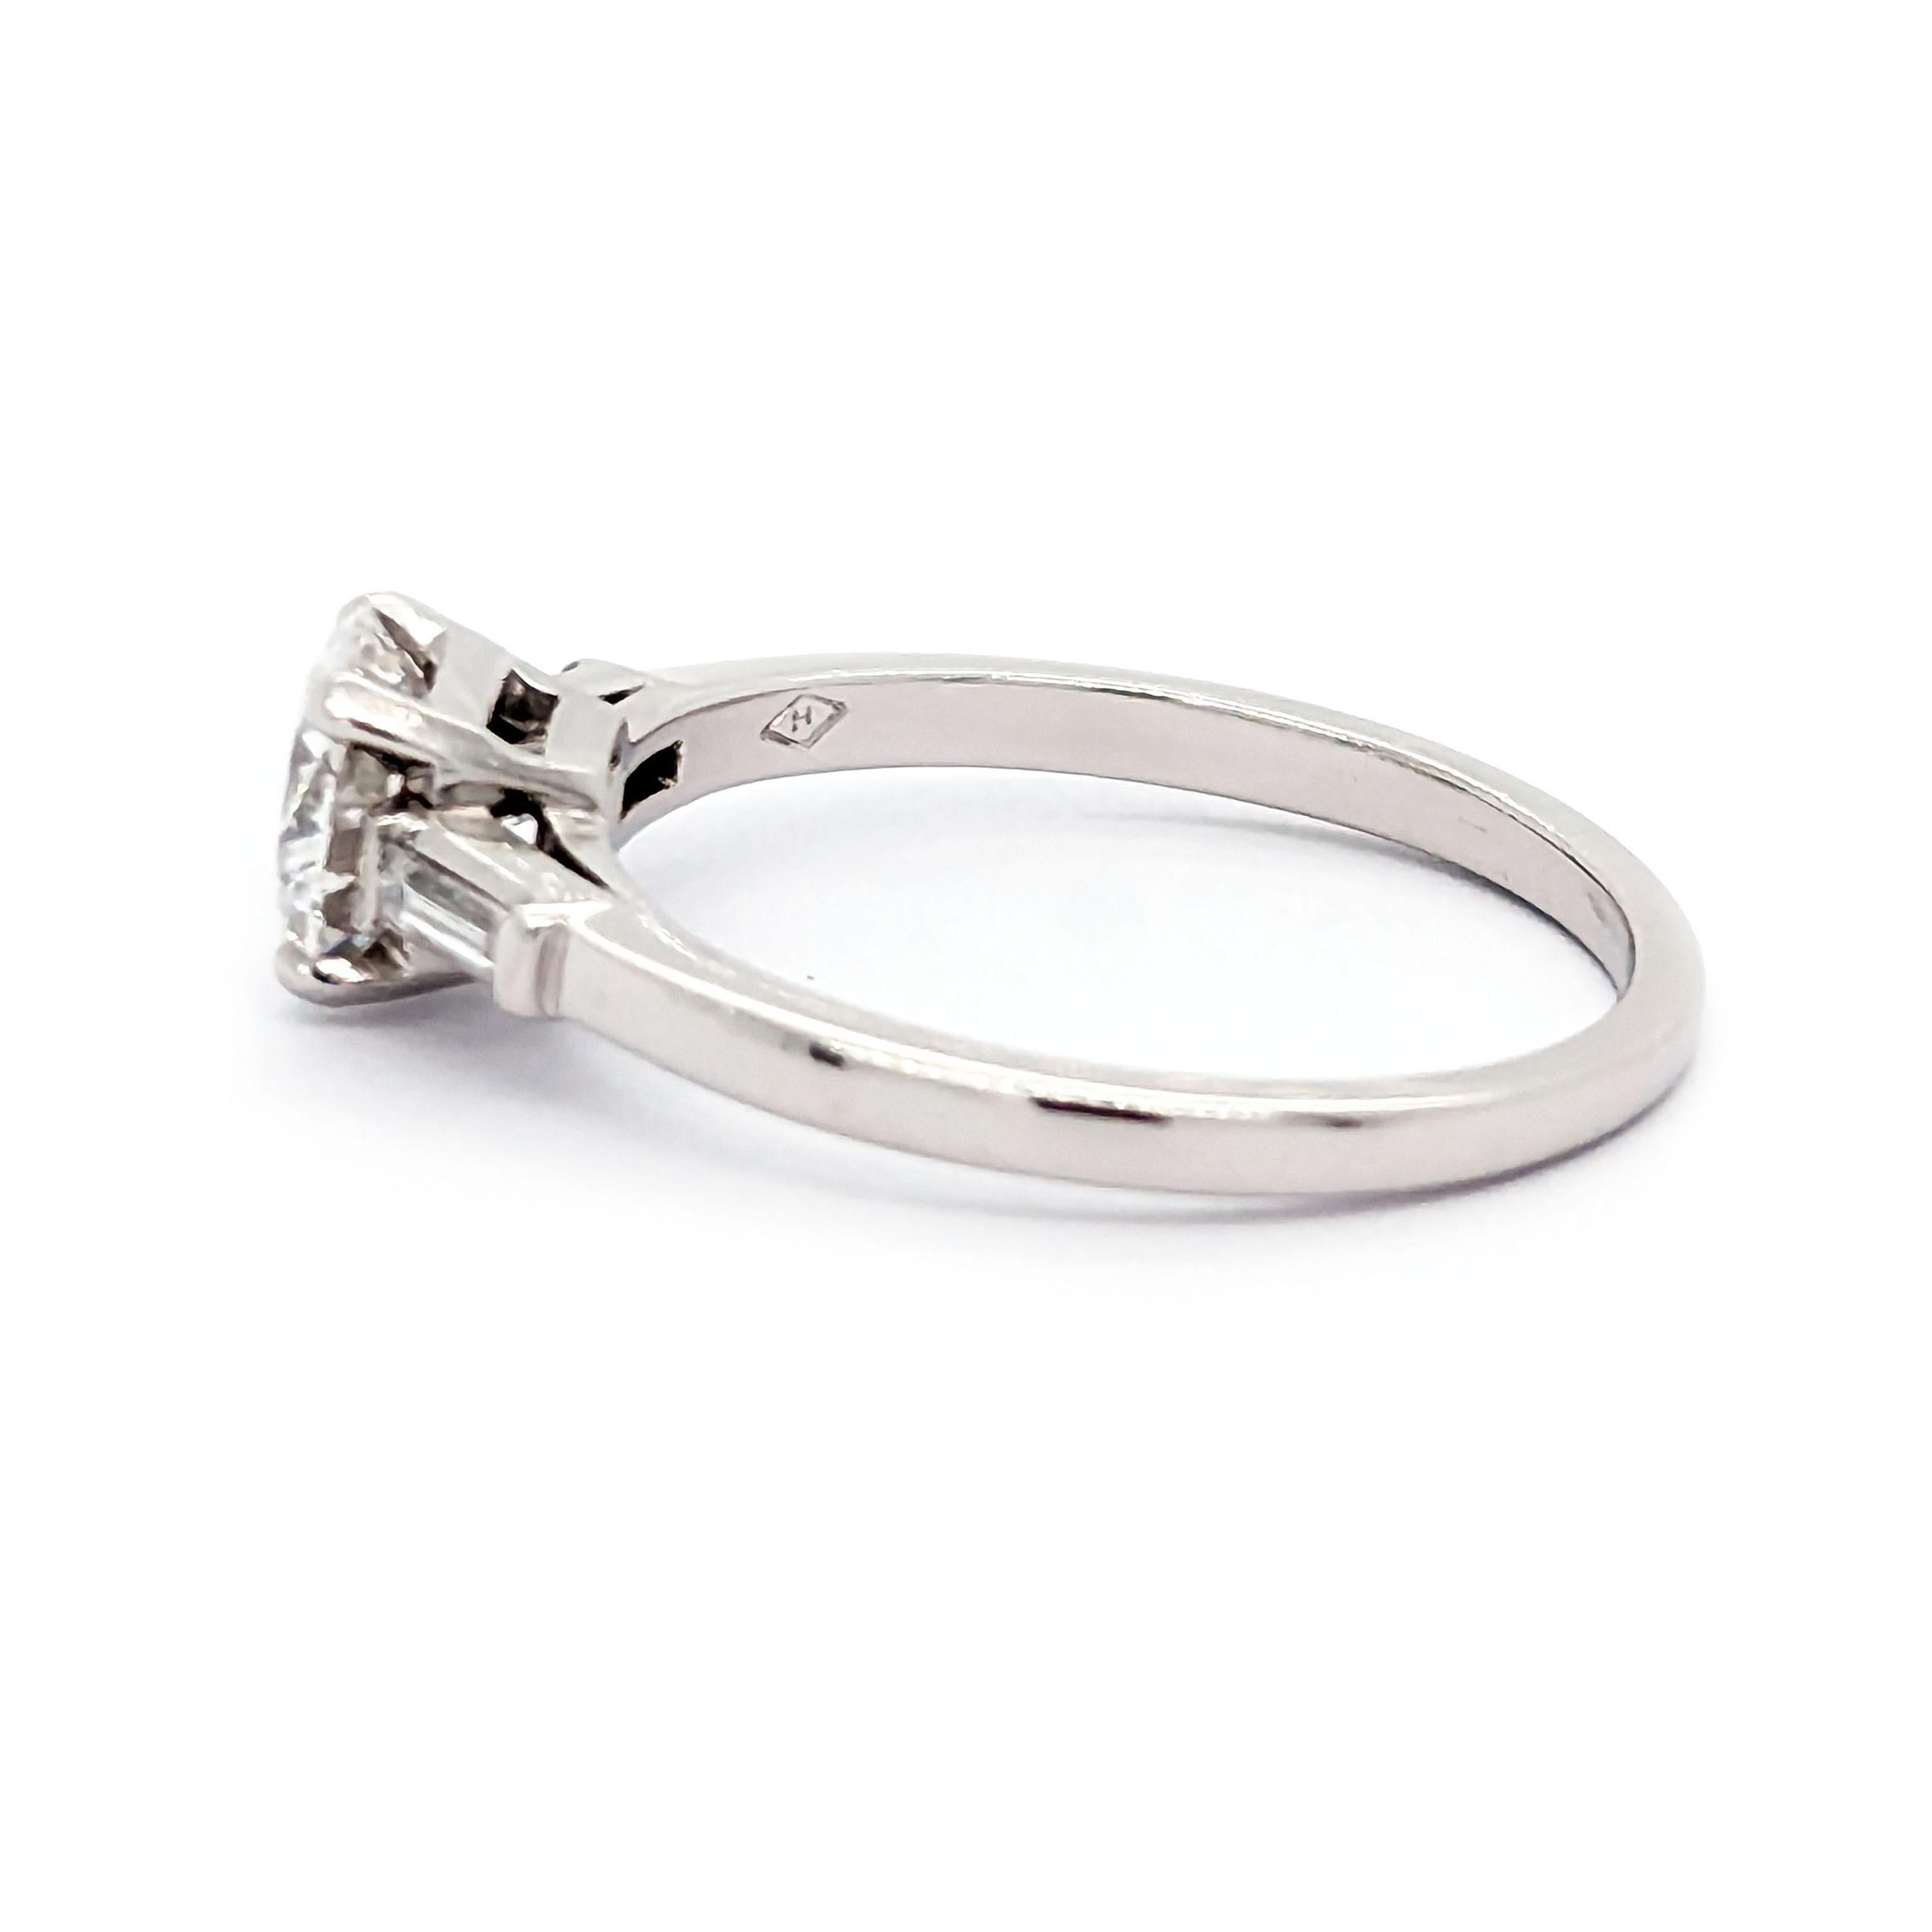 Vintage Solitaire Diamond and Platinum Ring, 0.81 Carats, Circa 1940 For Sale 1